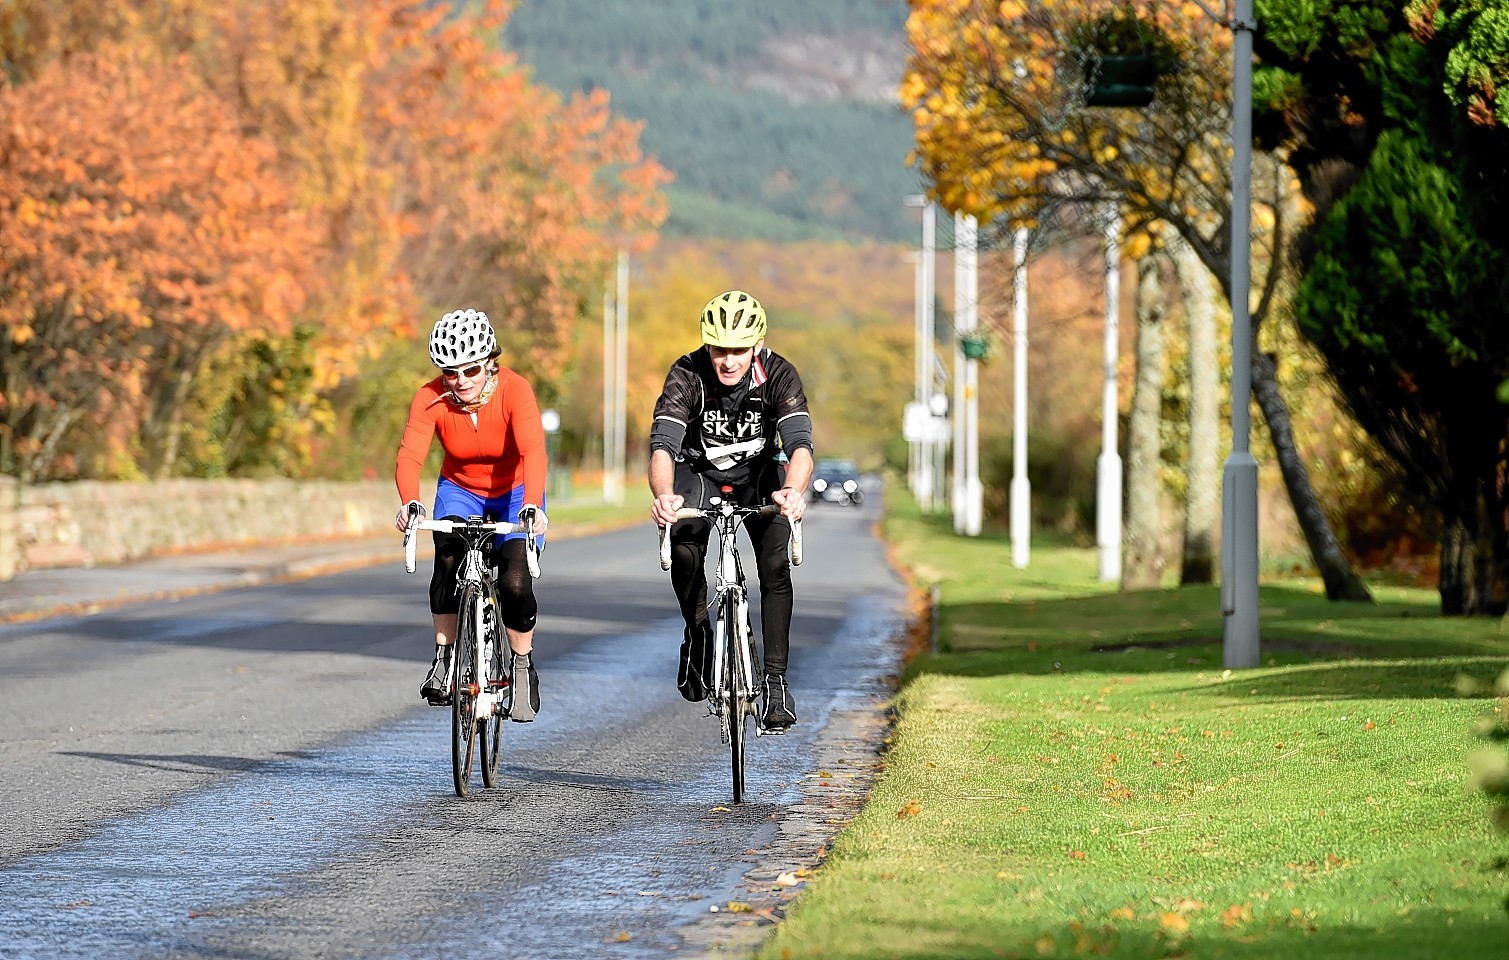 Cyclists take part in the charity ride for Kayleigh's Wee Stars at Ballater. Picture by Colin Rennie